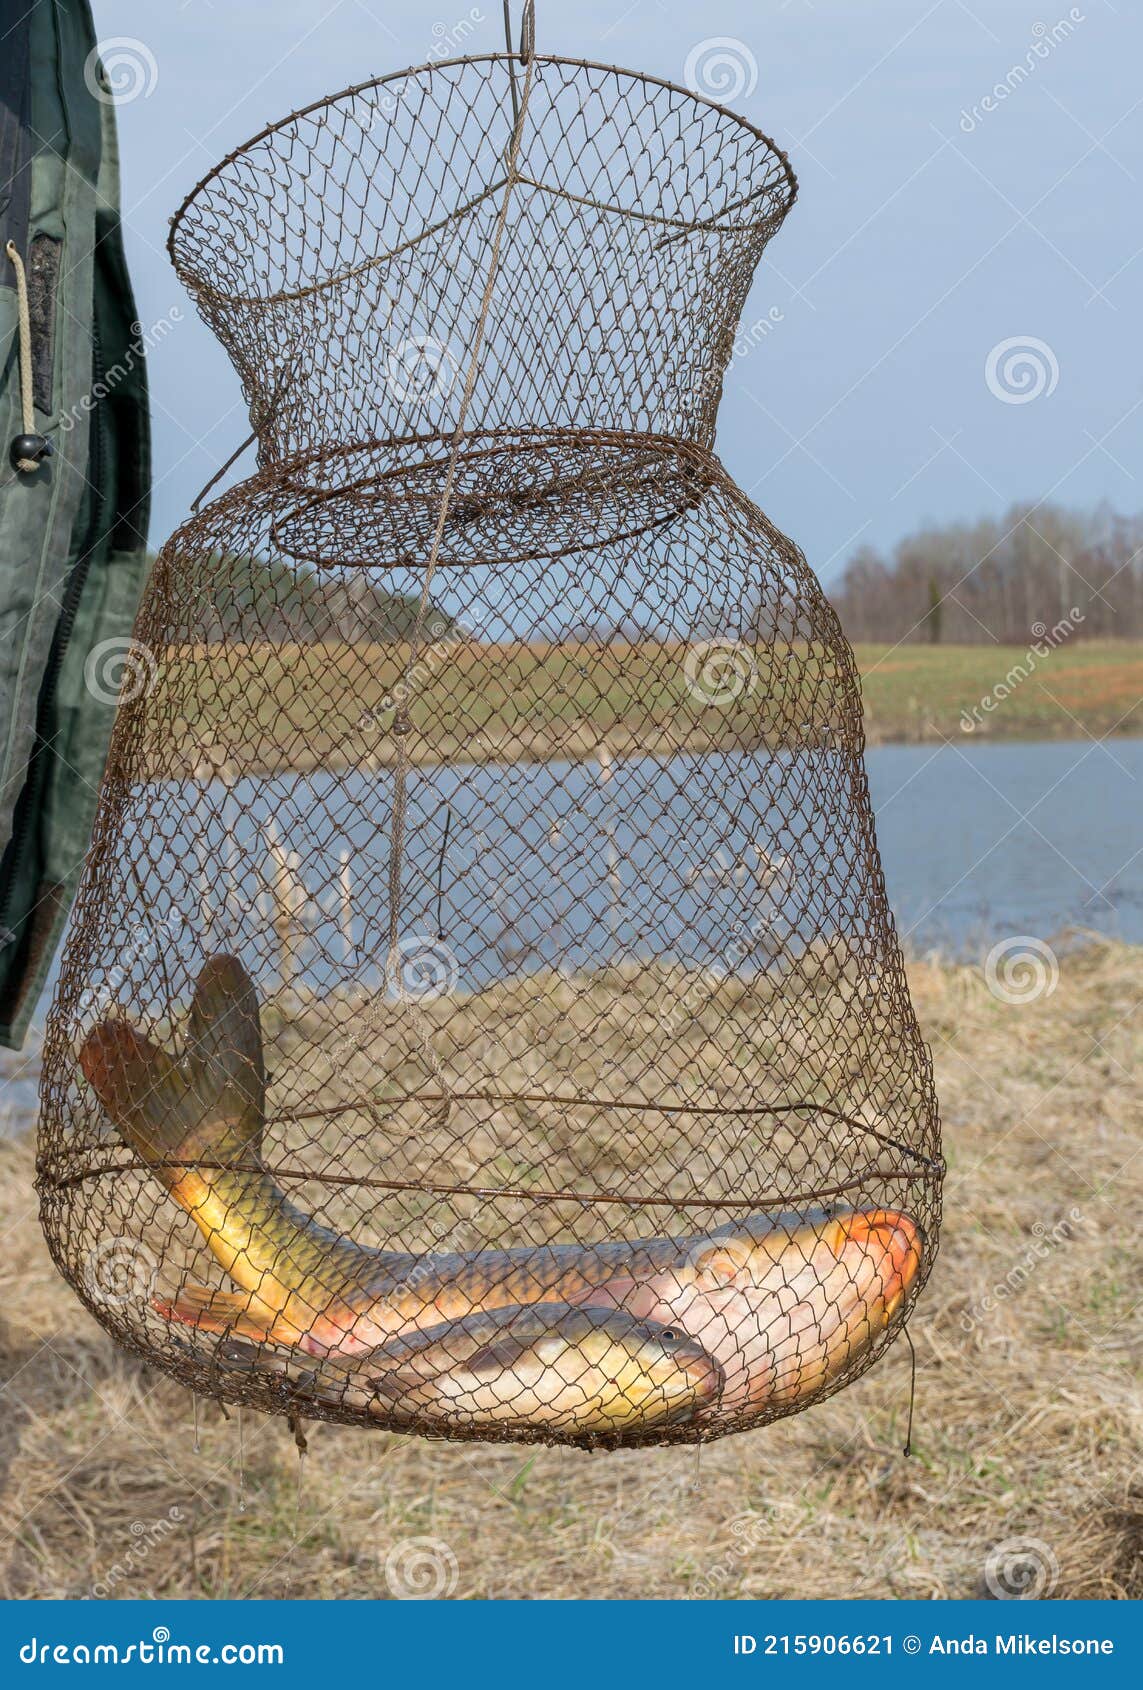 A Carp Caught in a Fish Net, Fishing As a Hobby, Early Spring in Nature,  Amateur Fishing Stock Image - Image of catch, wild: 215906621